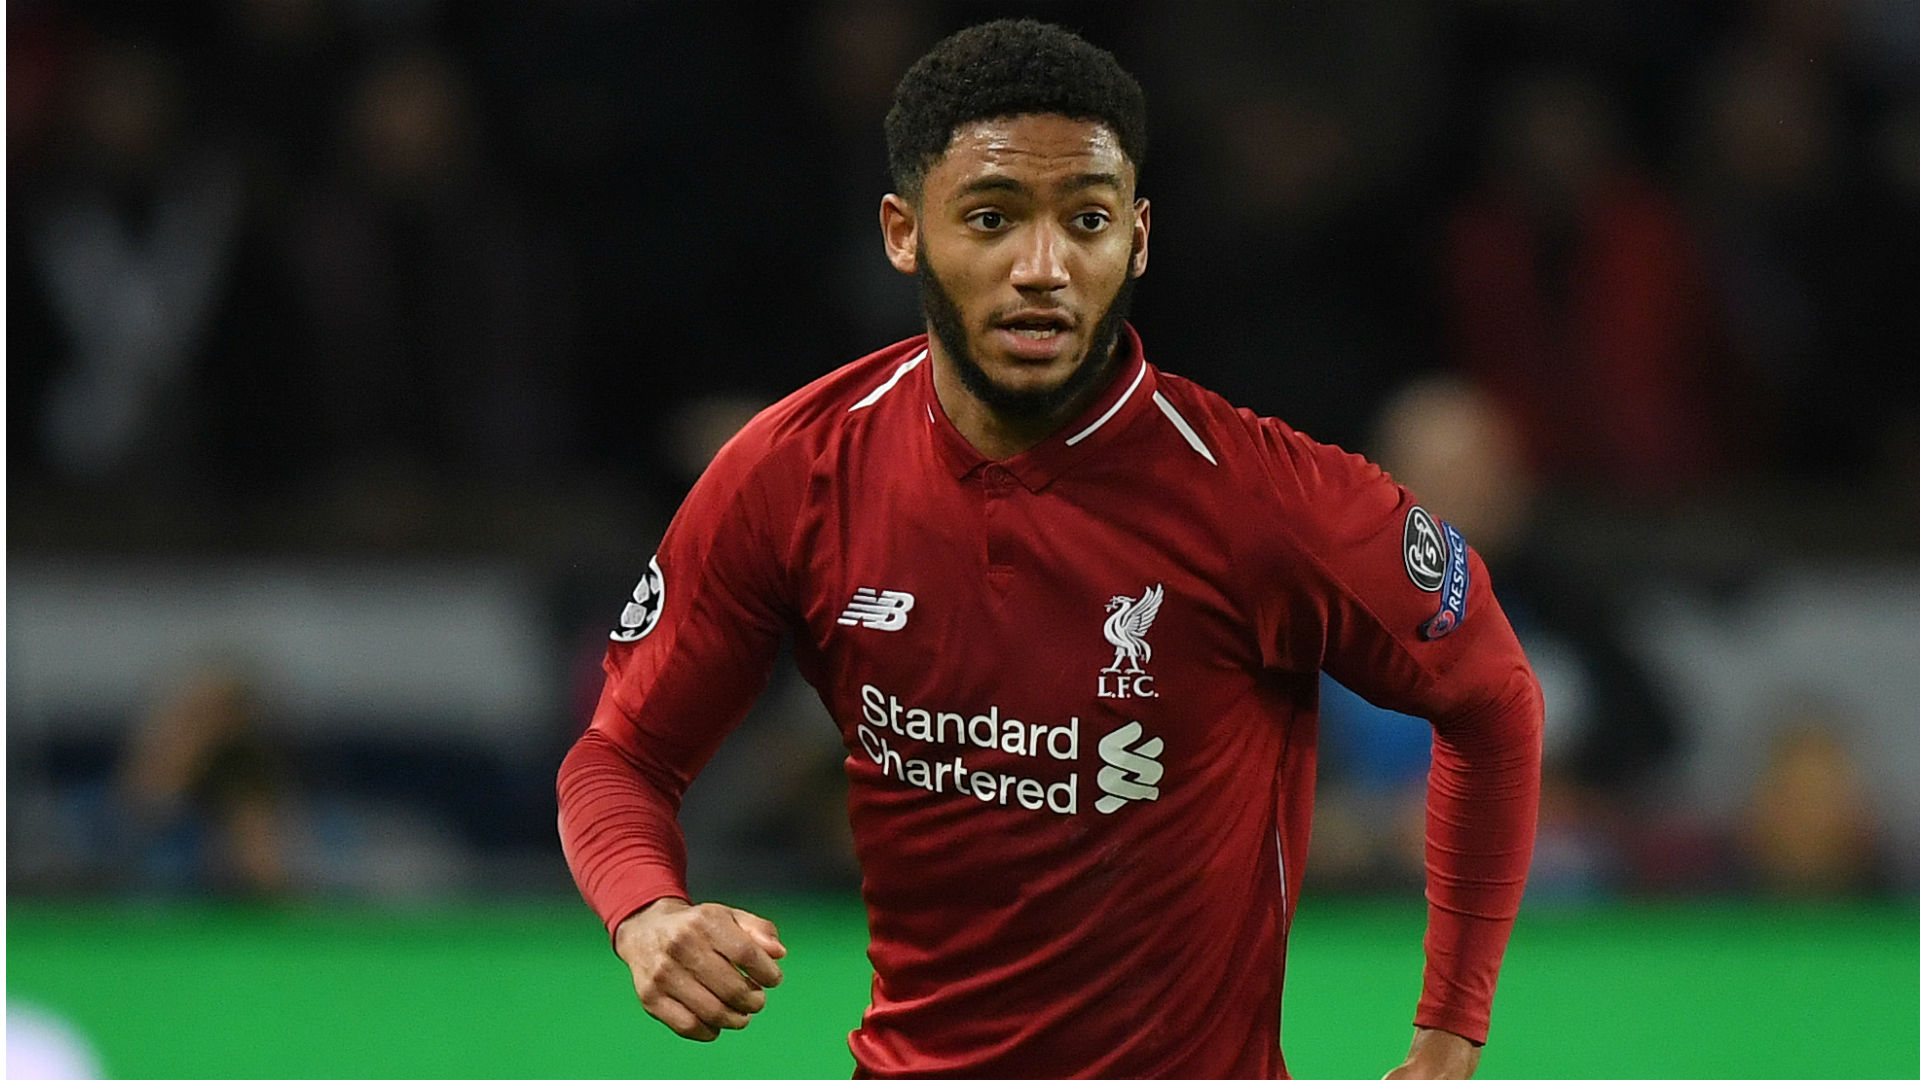 Joe Gomez returned on Wednesday from the broken leg he suffered in December and Alisson is pumped to see the defender back in the fold.